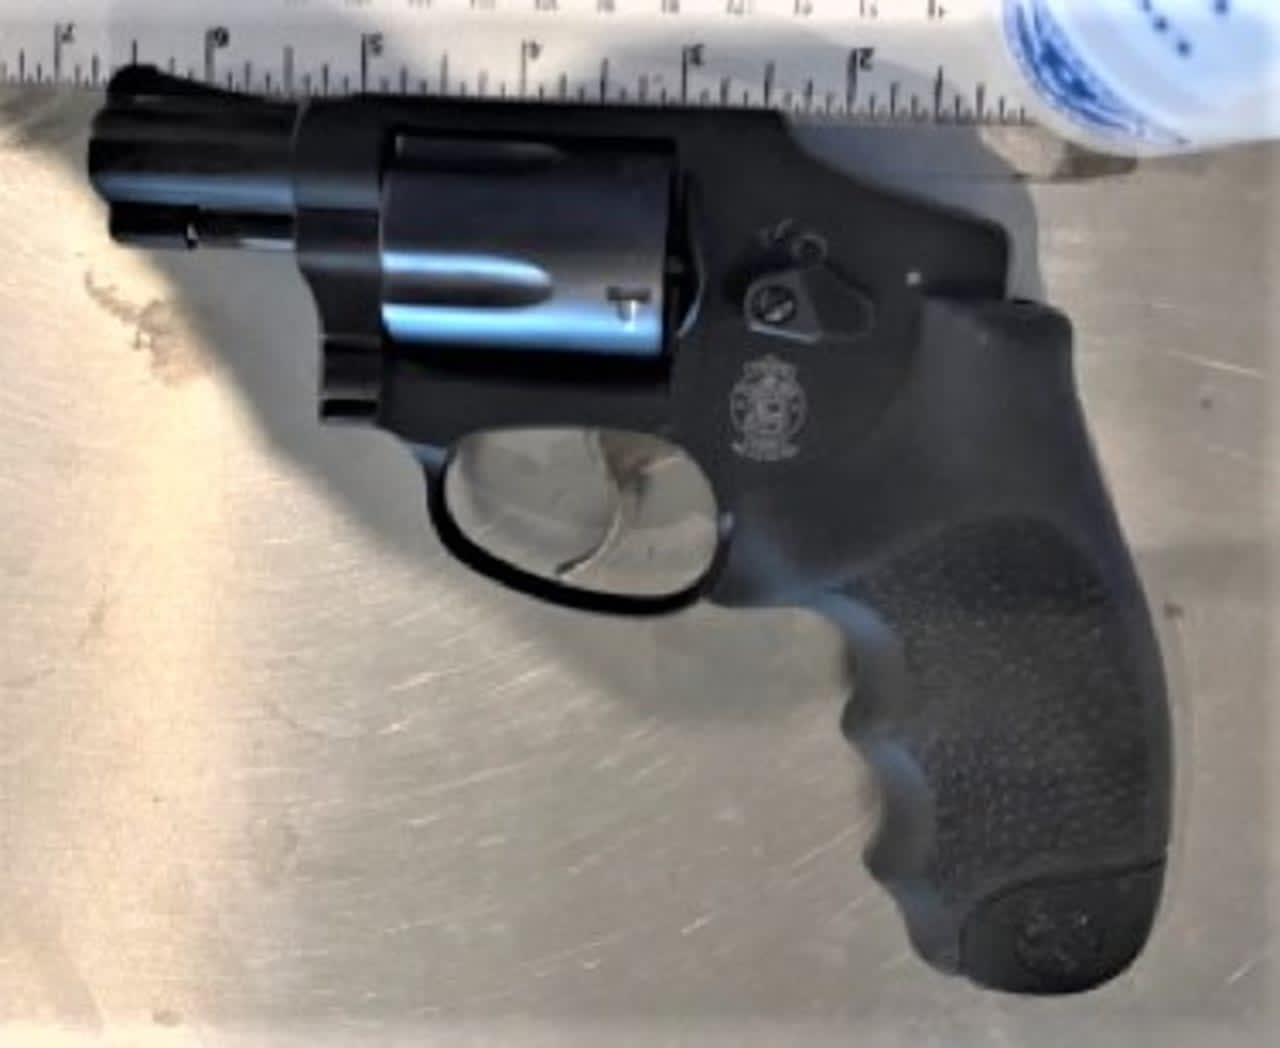 A woman was arrested after officials said she tried to board a flight at LaGuardia Airport with a loaded revolver.